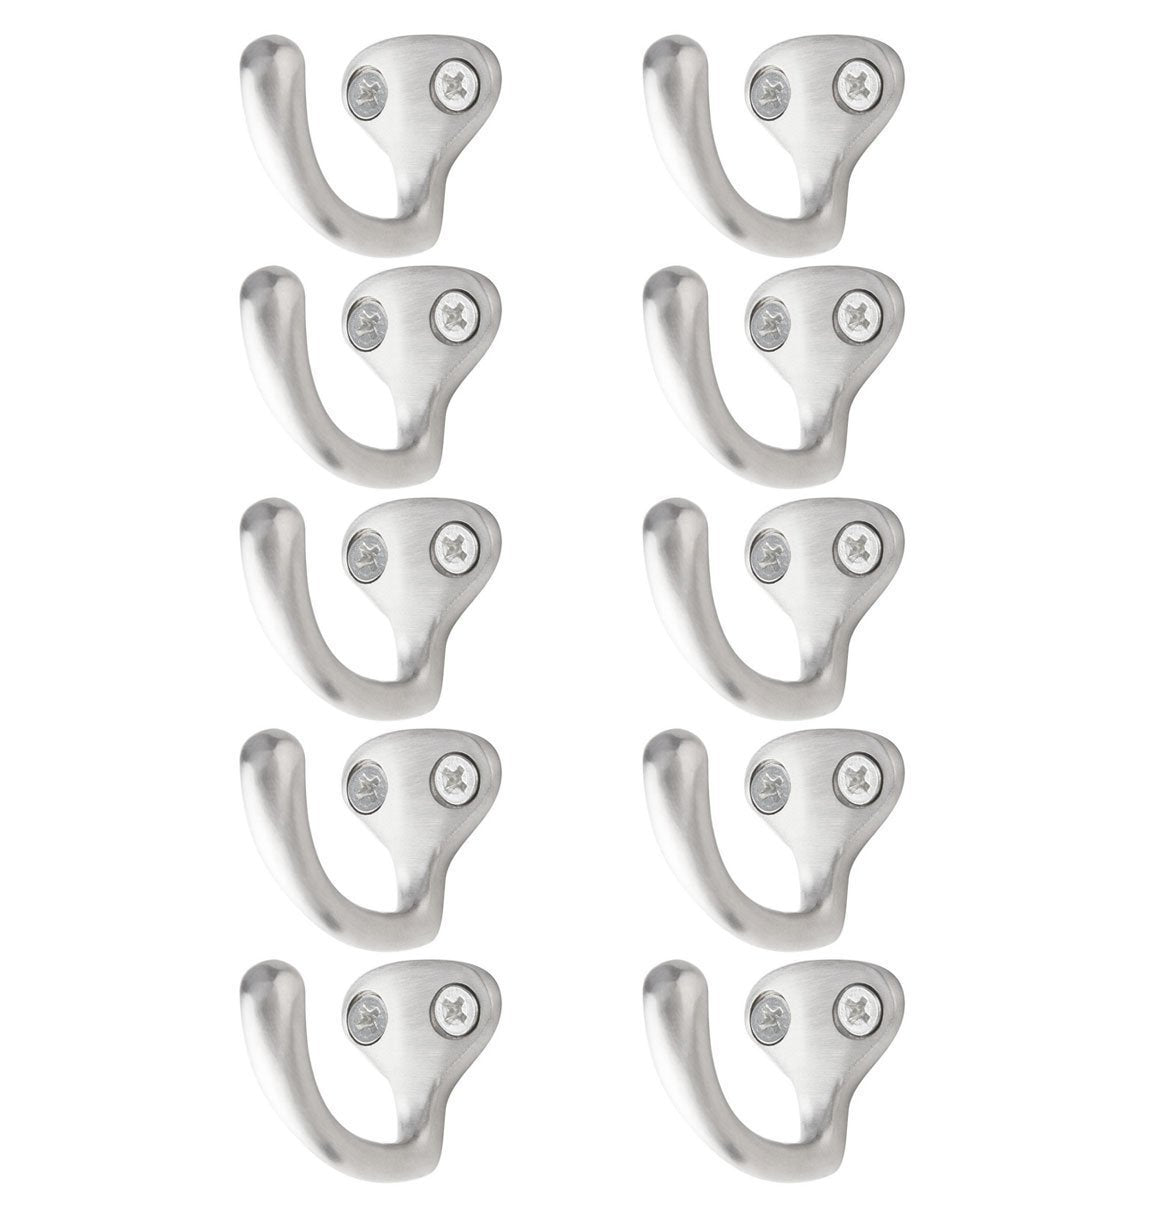 Bar Face/Wall Mount Purse, Coat & Key Hook - Brushed Stainless Steel - Set of 10